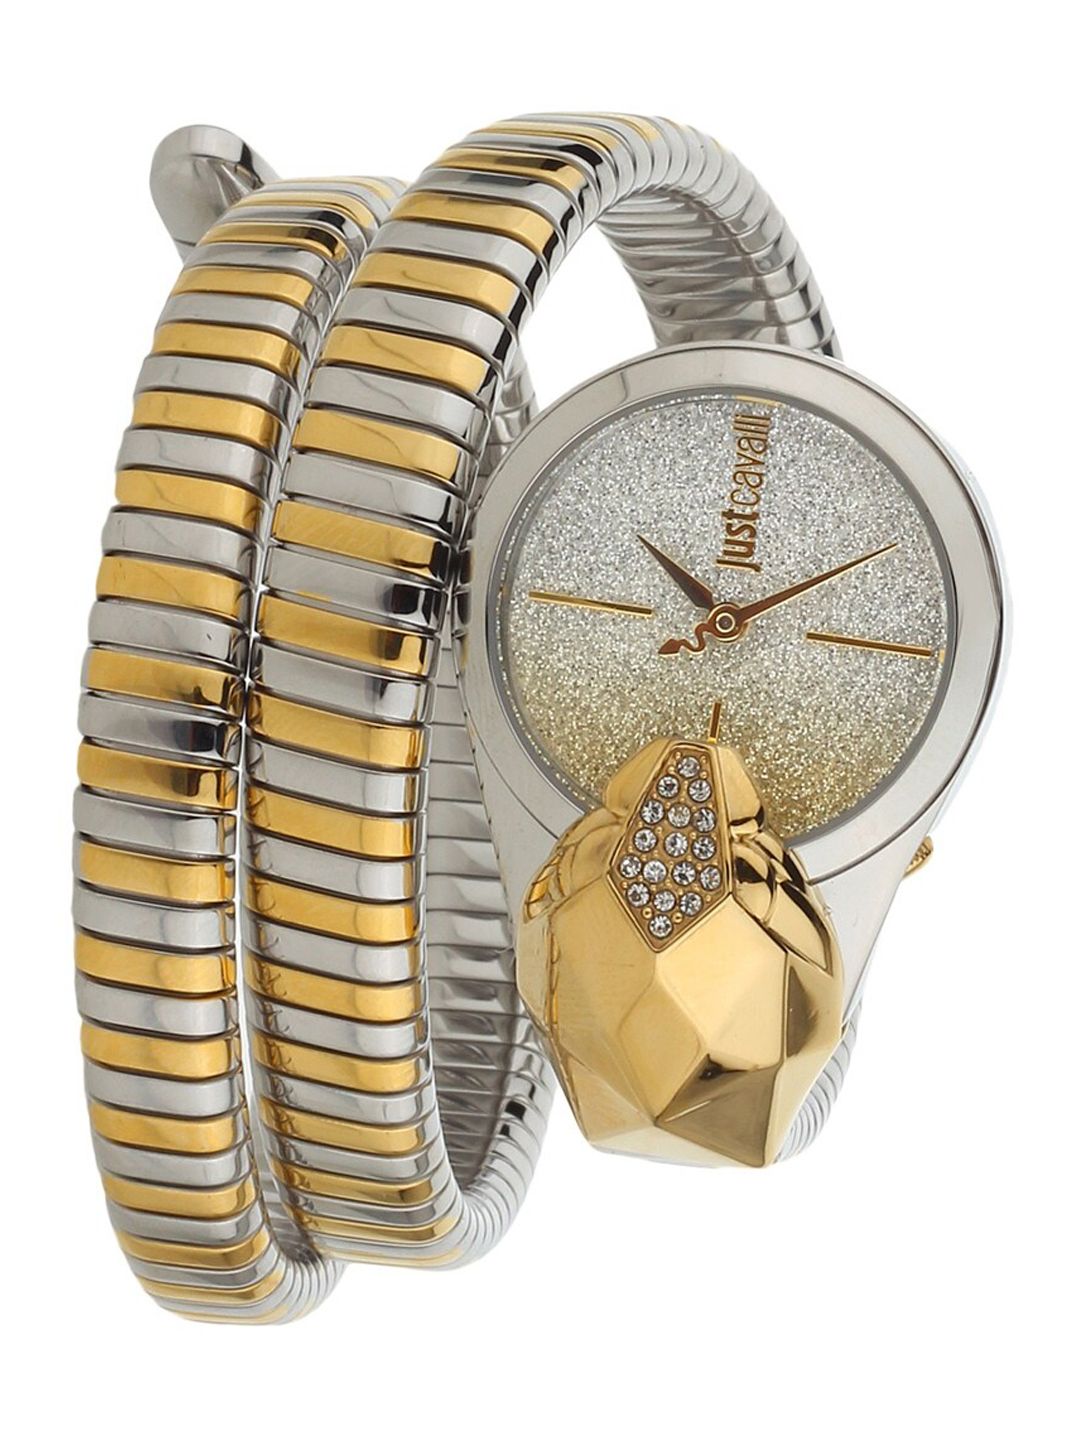 Just Cavalli Women Silver & Gold Glam Snake Analogue Watch JC1L114M0065 Price in India